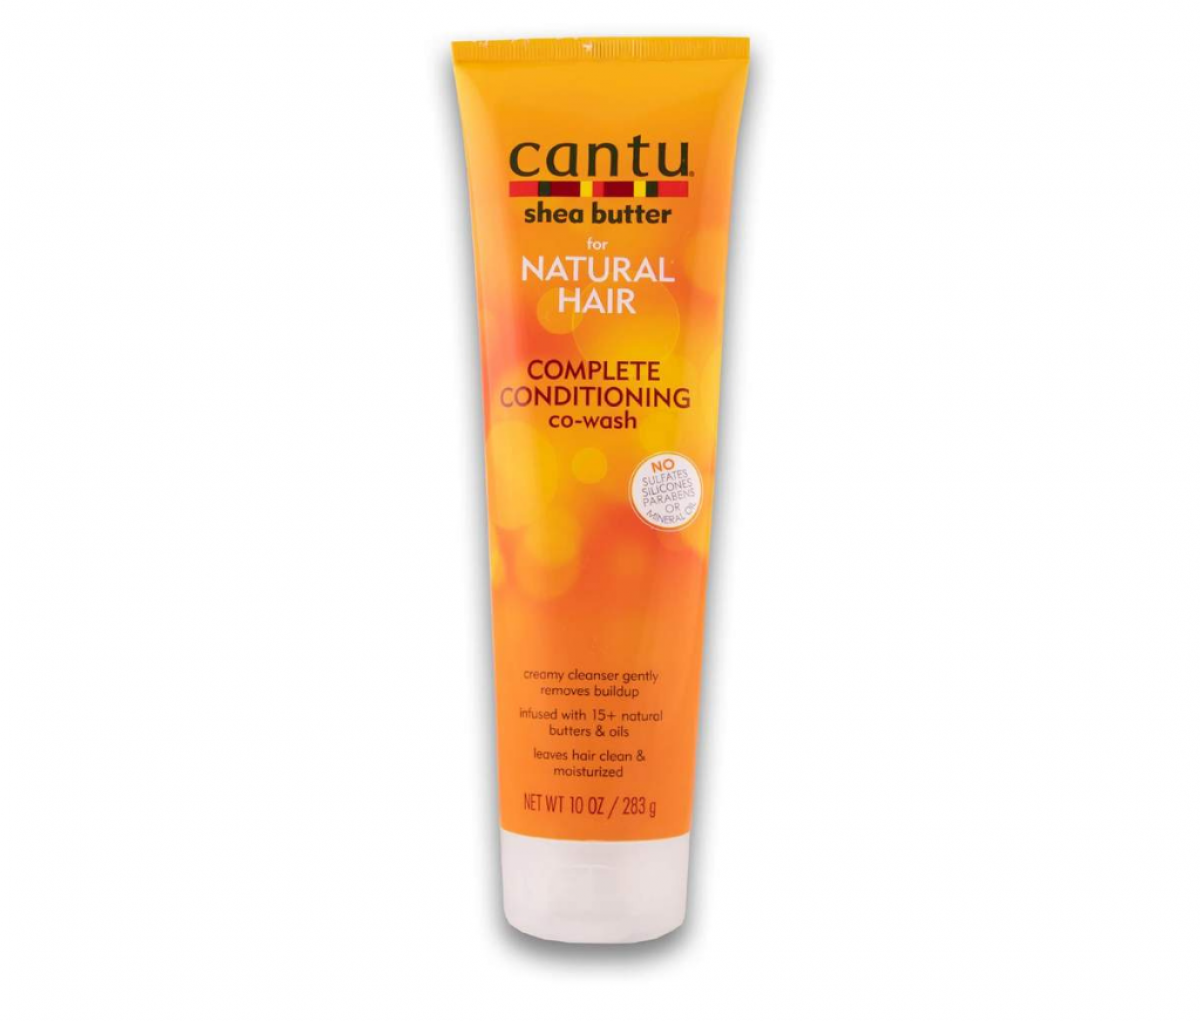 CANTU SB NATURAL HAIR COMPLETE CONDITIONING CO-WASH 283G